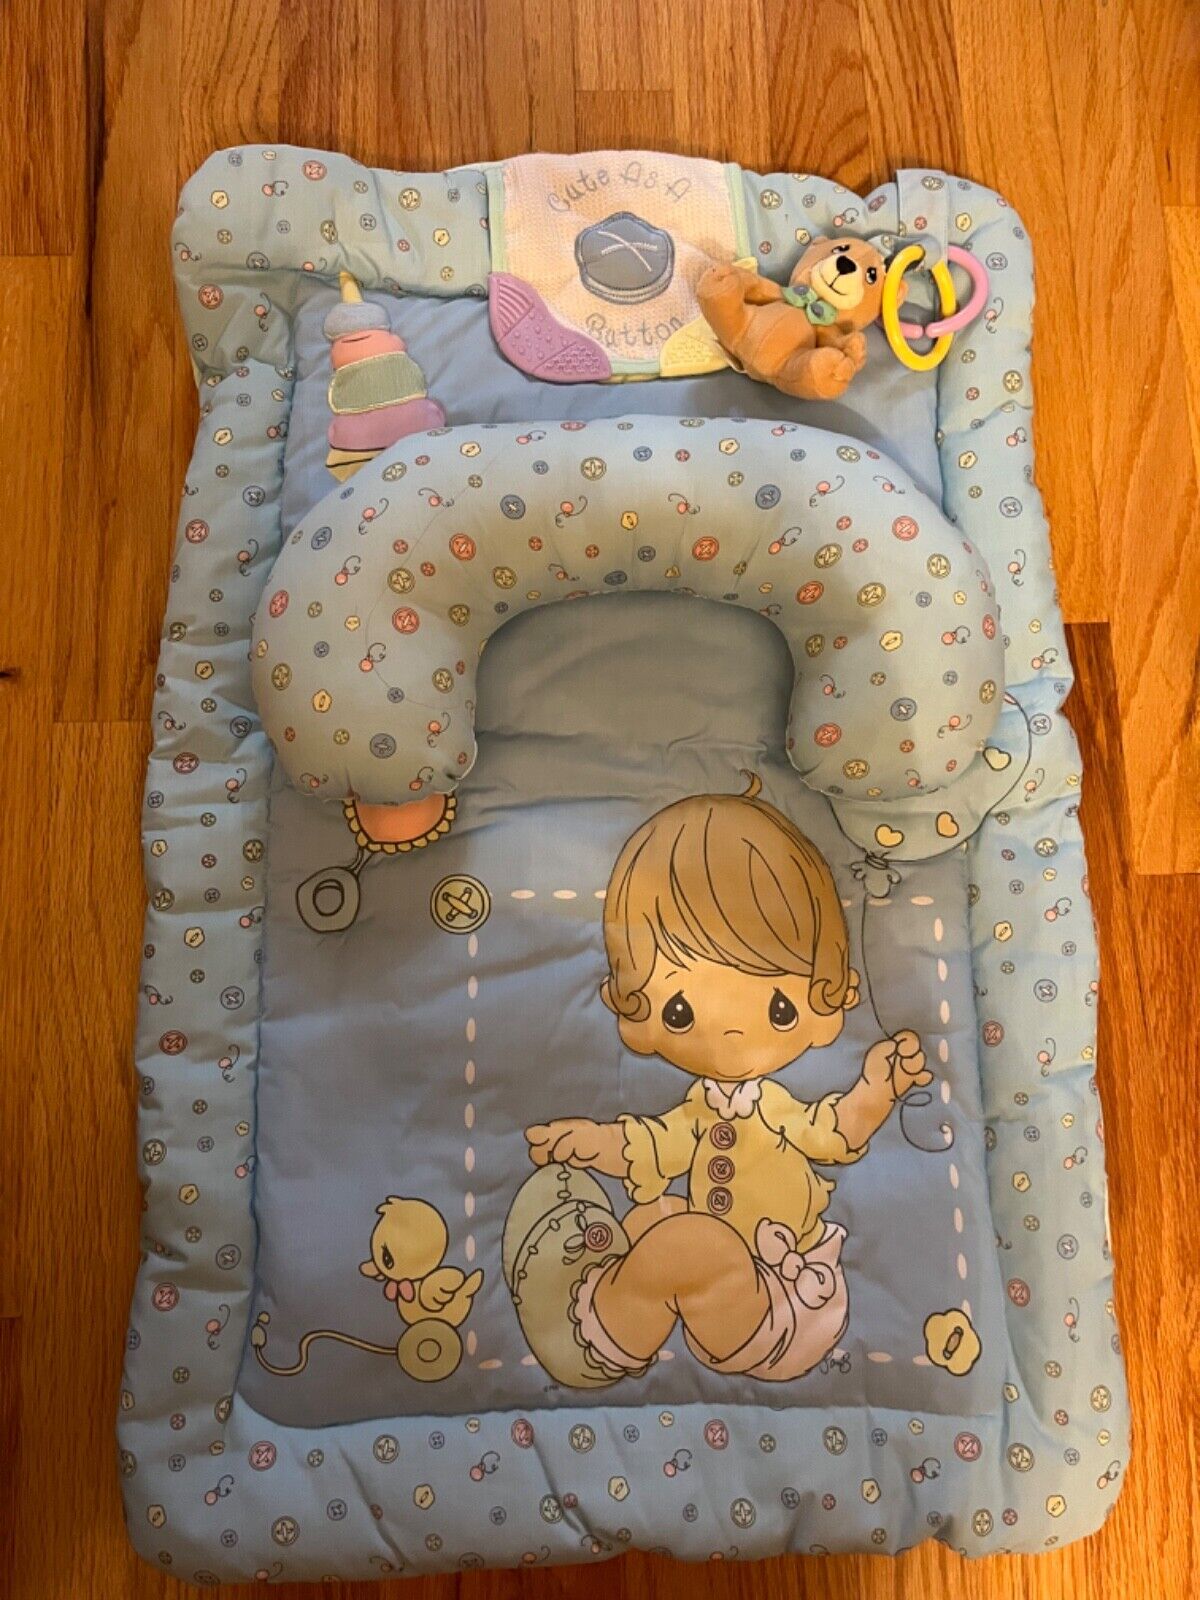 Vintage Precious Moments 2003 Playmat with headrest and Baby Quilt Perfect shape